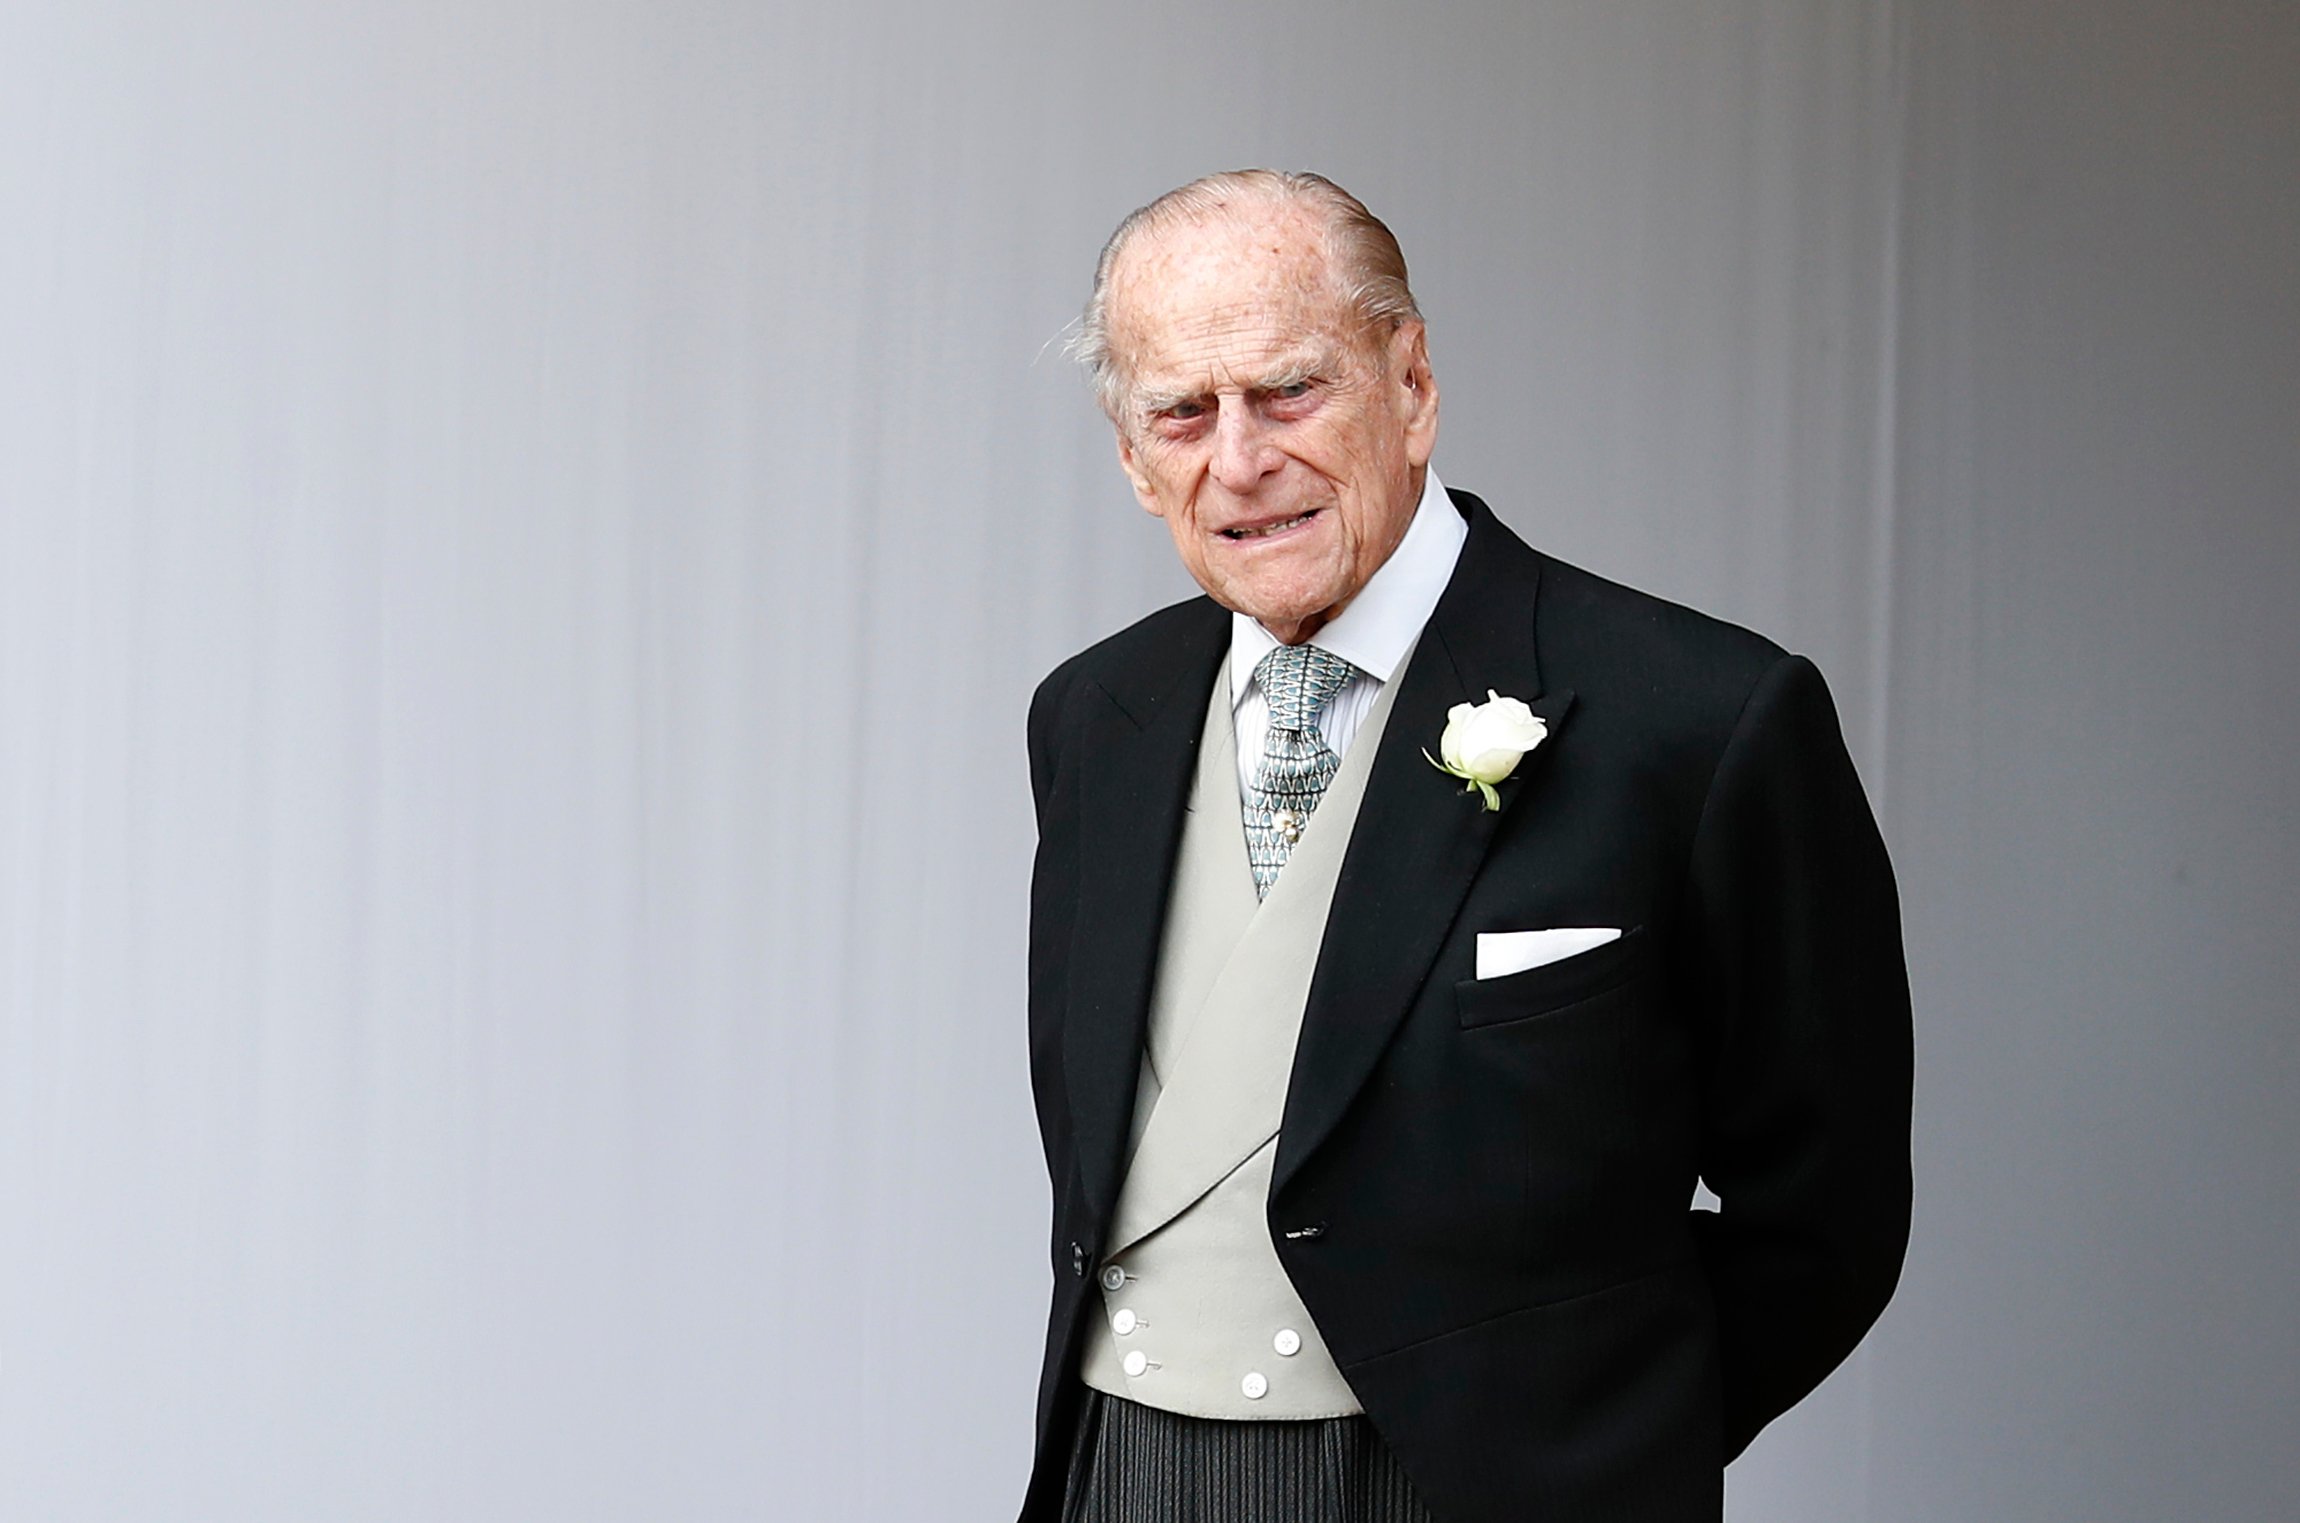 Prince Philip dressed in a suit for his granddaughter Princess Eugenie's wedding to Jack Brooksbank